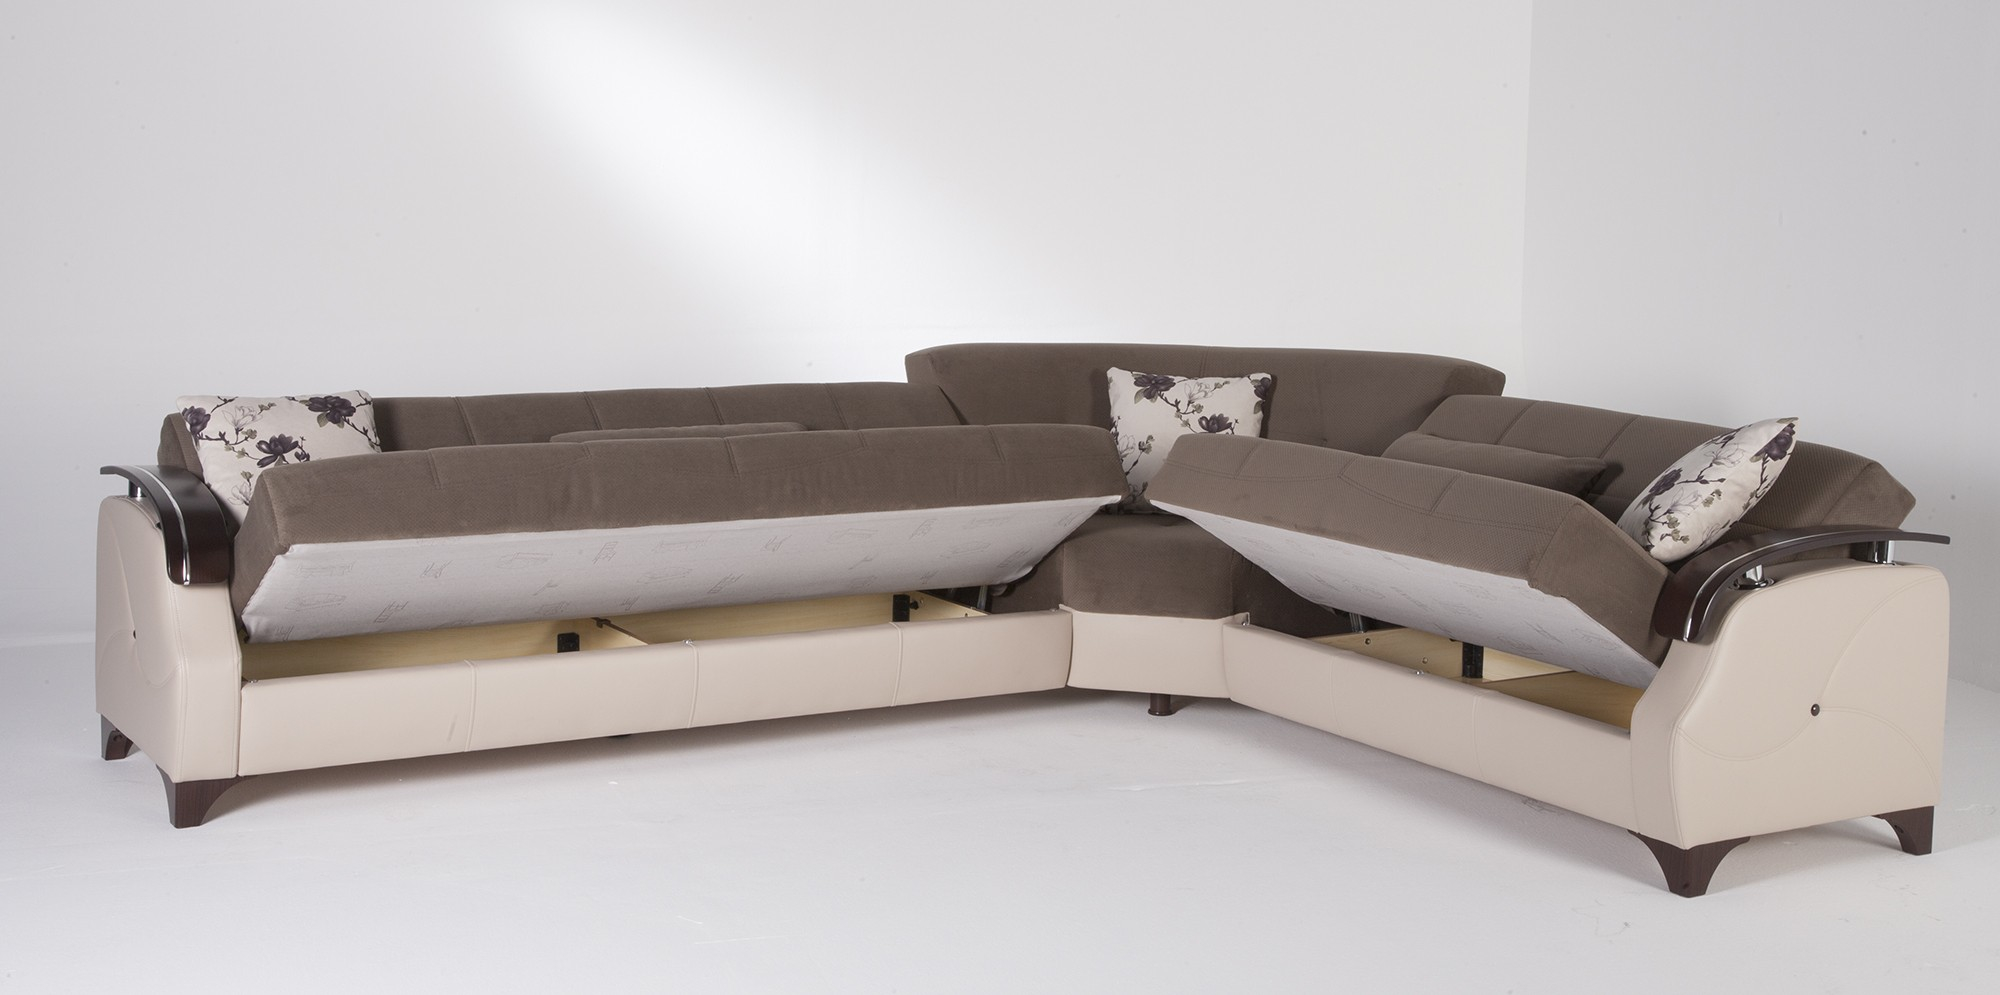 Sofa bed sectional wonderful sectional sofa beds latest living room decorating ideas with sofa XKMUJAF